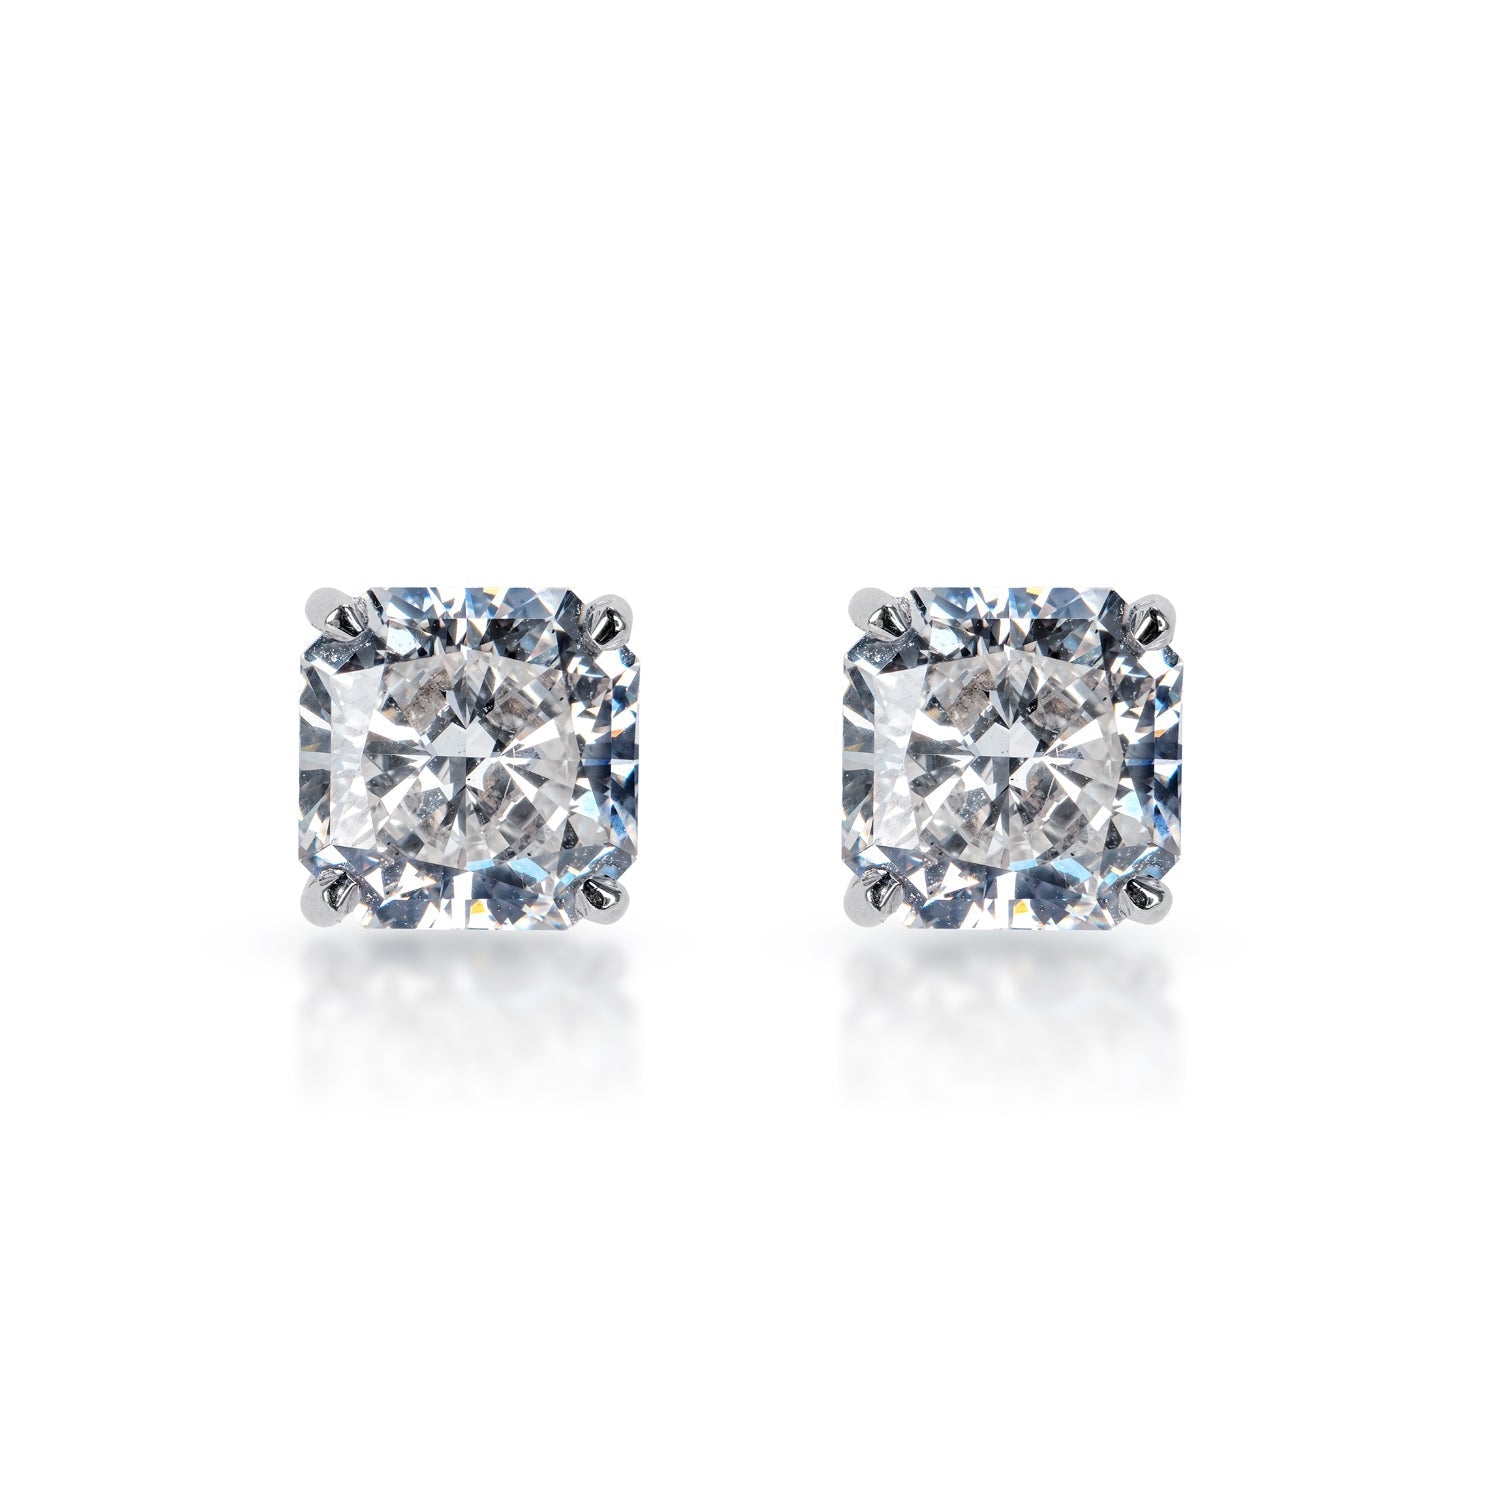 Lesly 6 Carat Radiant Cut Lab Grown Diamond Studs Earrings in 14k White Gold Front View